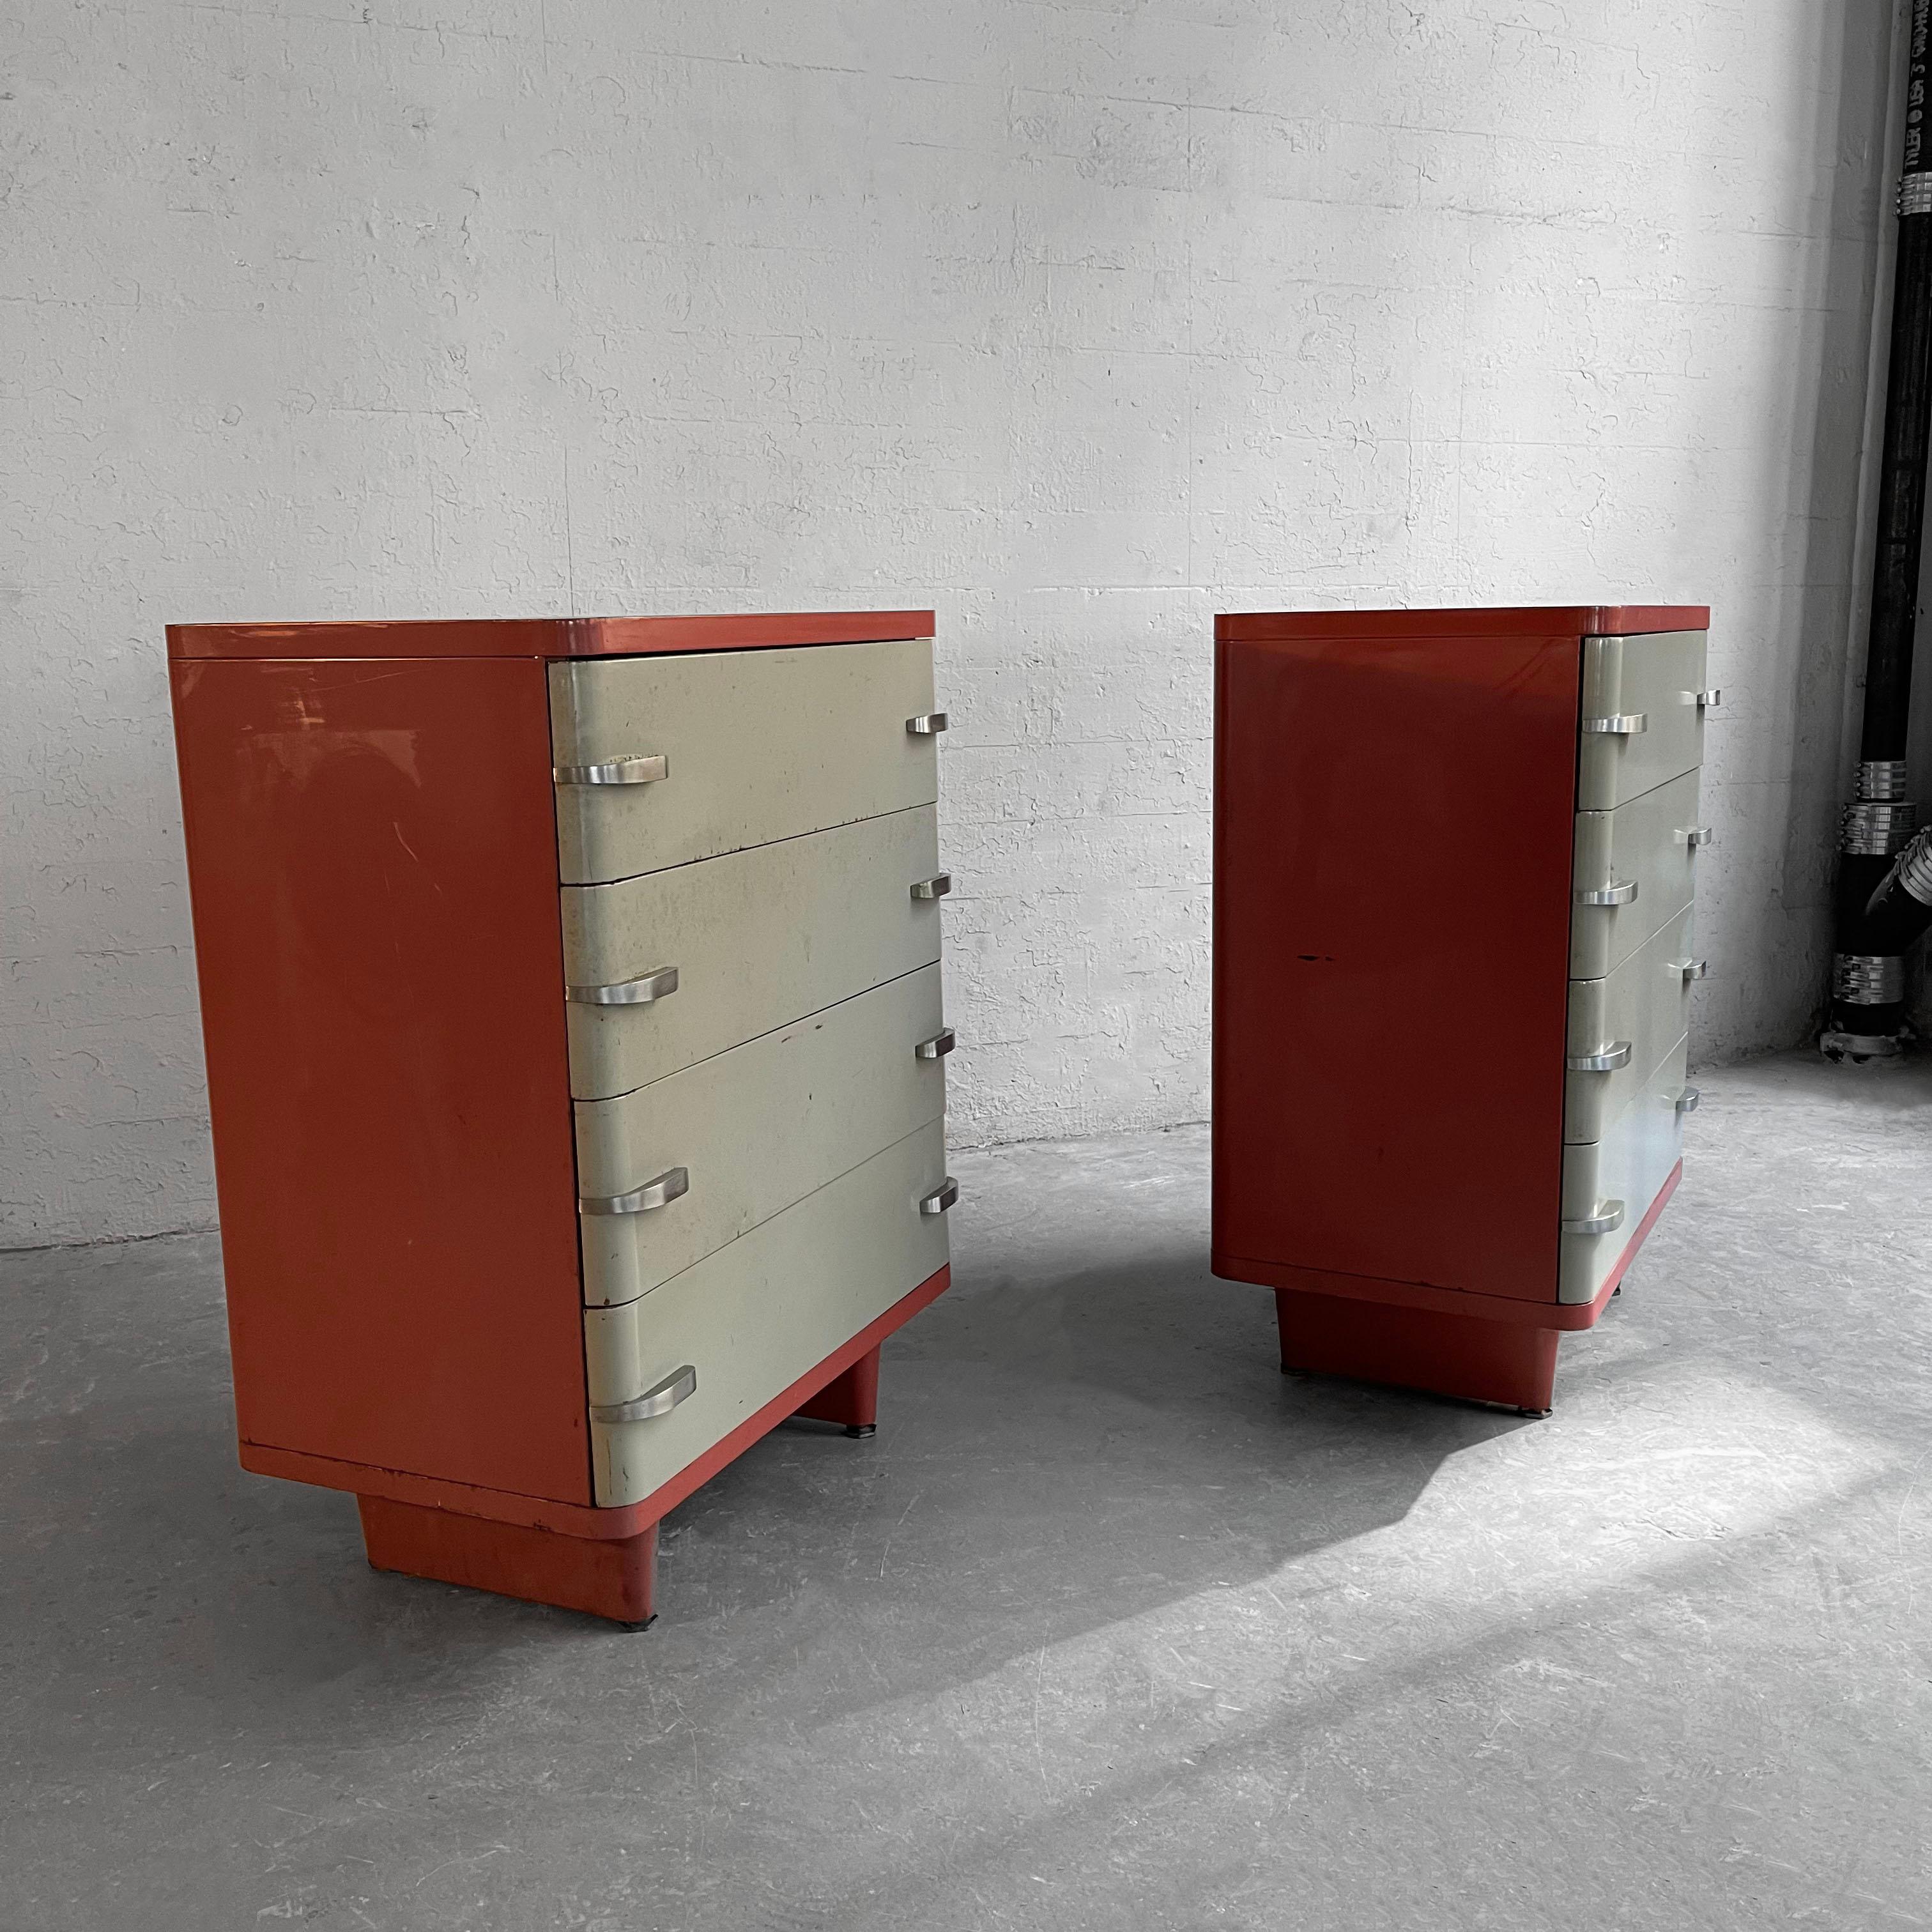 Machine-Age Painted Steel Highboy Dressers by Norman Bel Geddes In Good Condition For Sale In Brooklyn, NY